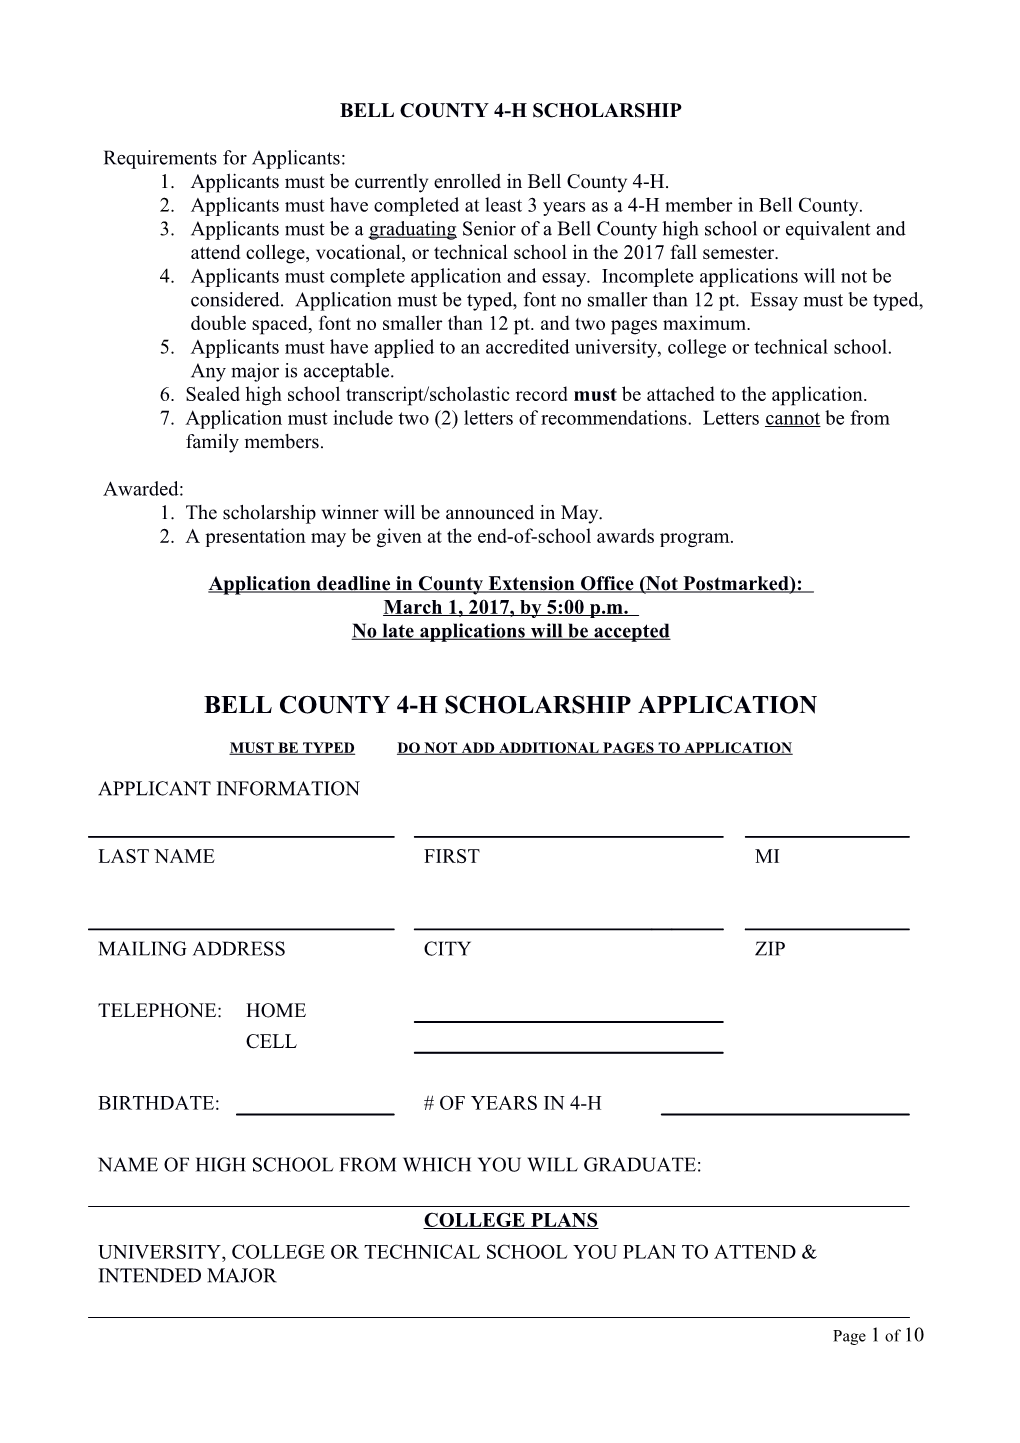 Bell County 4-H Scholarship